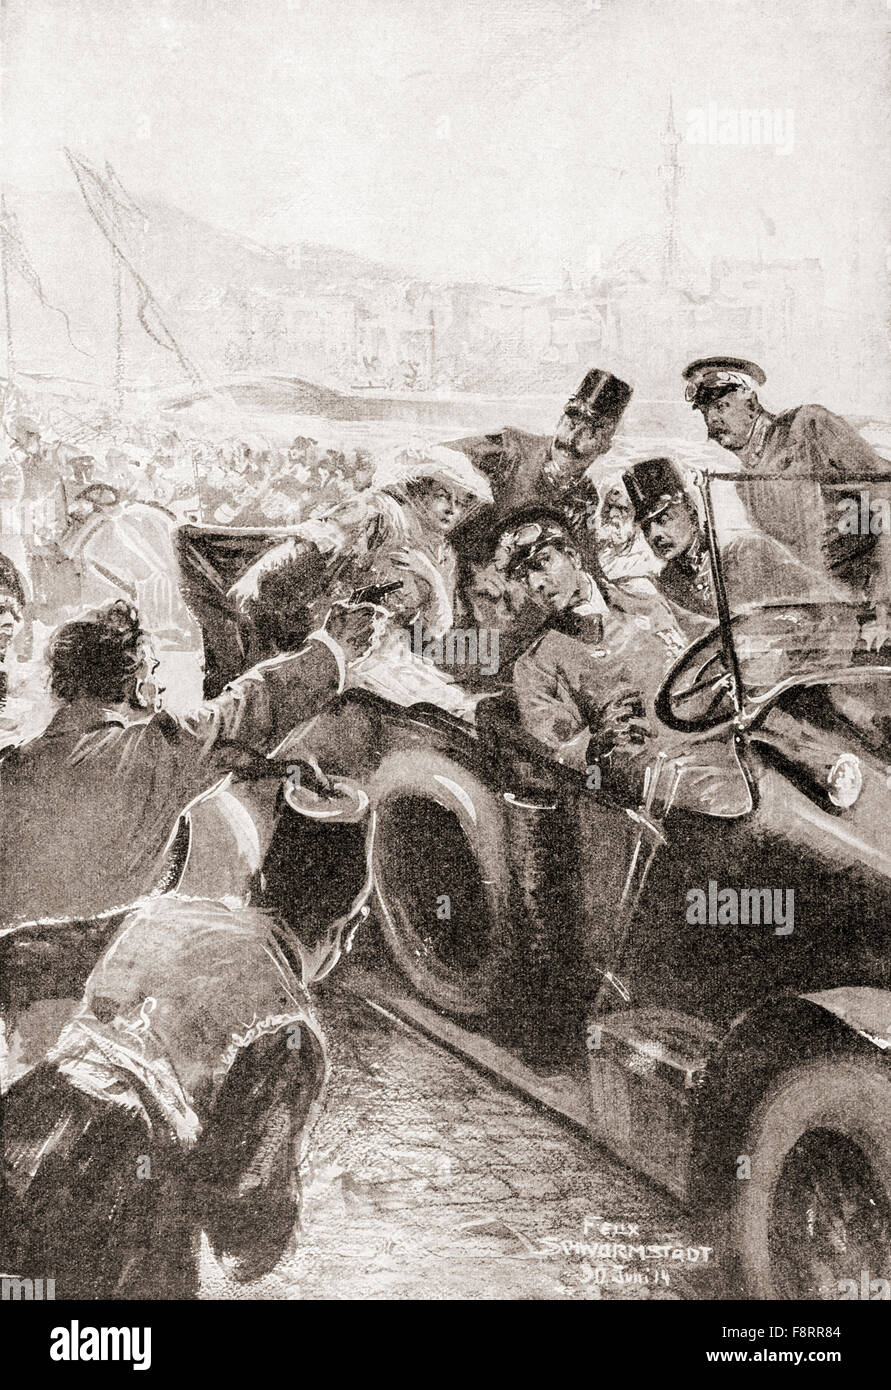 The assassination of Franz Ferdinand and his wife, Sophie, Duchess of Hohenberg, 28 June, 1914 in Sarajevo by Gavrilo Princip.   Franz Ferdinand, 1863 – 1914.  Archduke of Austria-Este, Austro-Hungarian and Royal Prince of Hungary and of Bohemia. Stock Photo